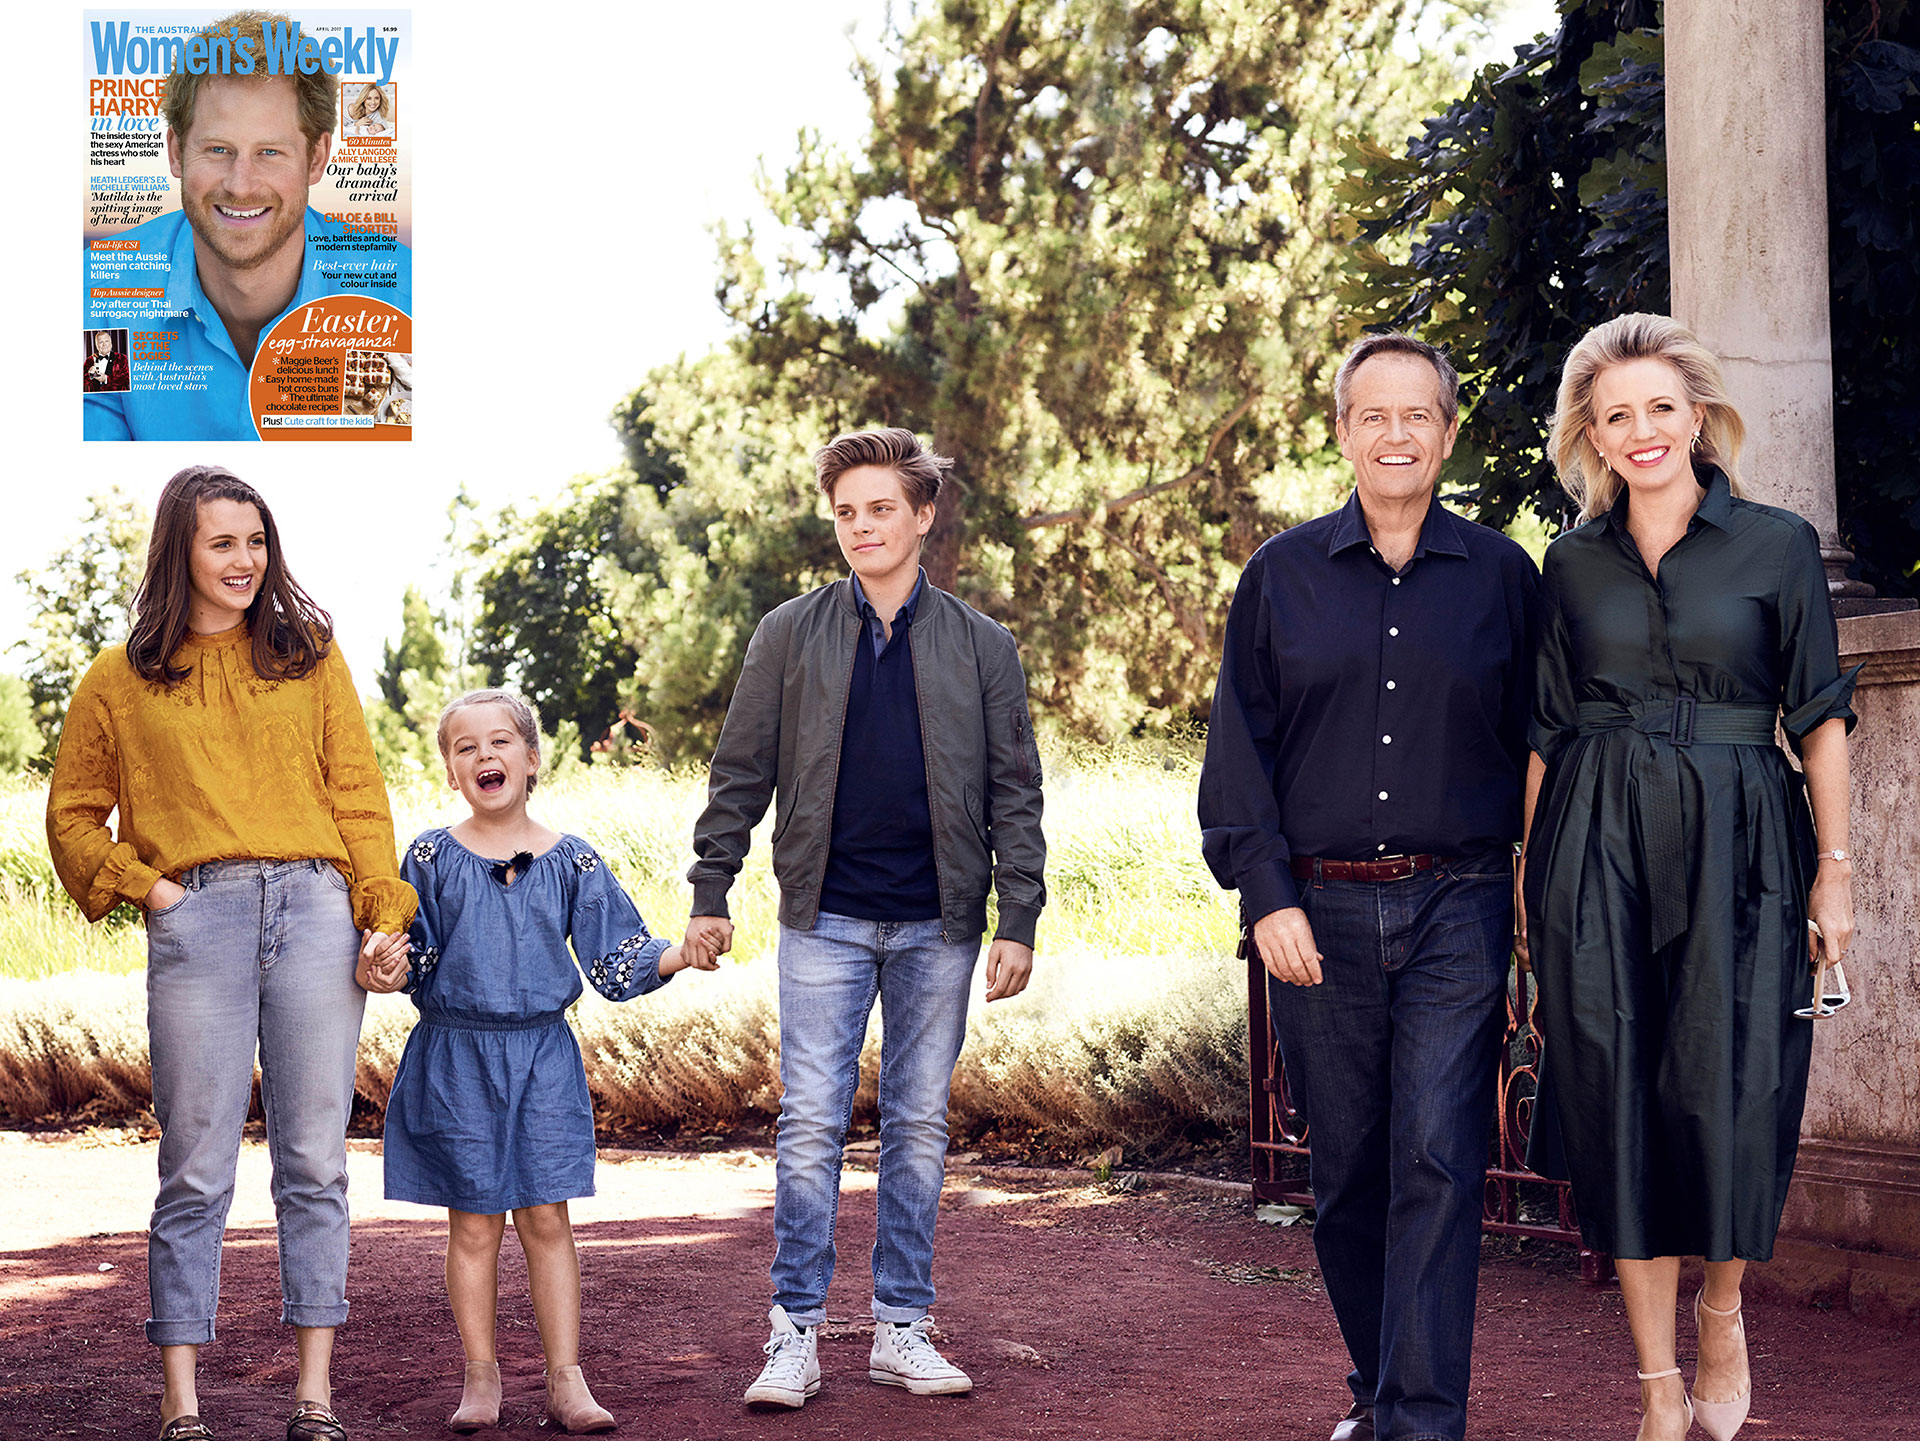 Bill and Chloe Shorten reveal the ups and downs of a blended family